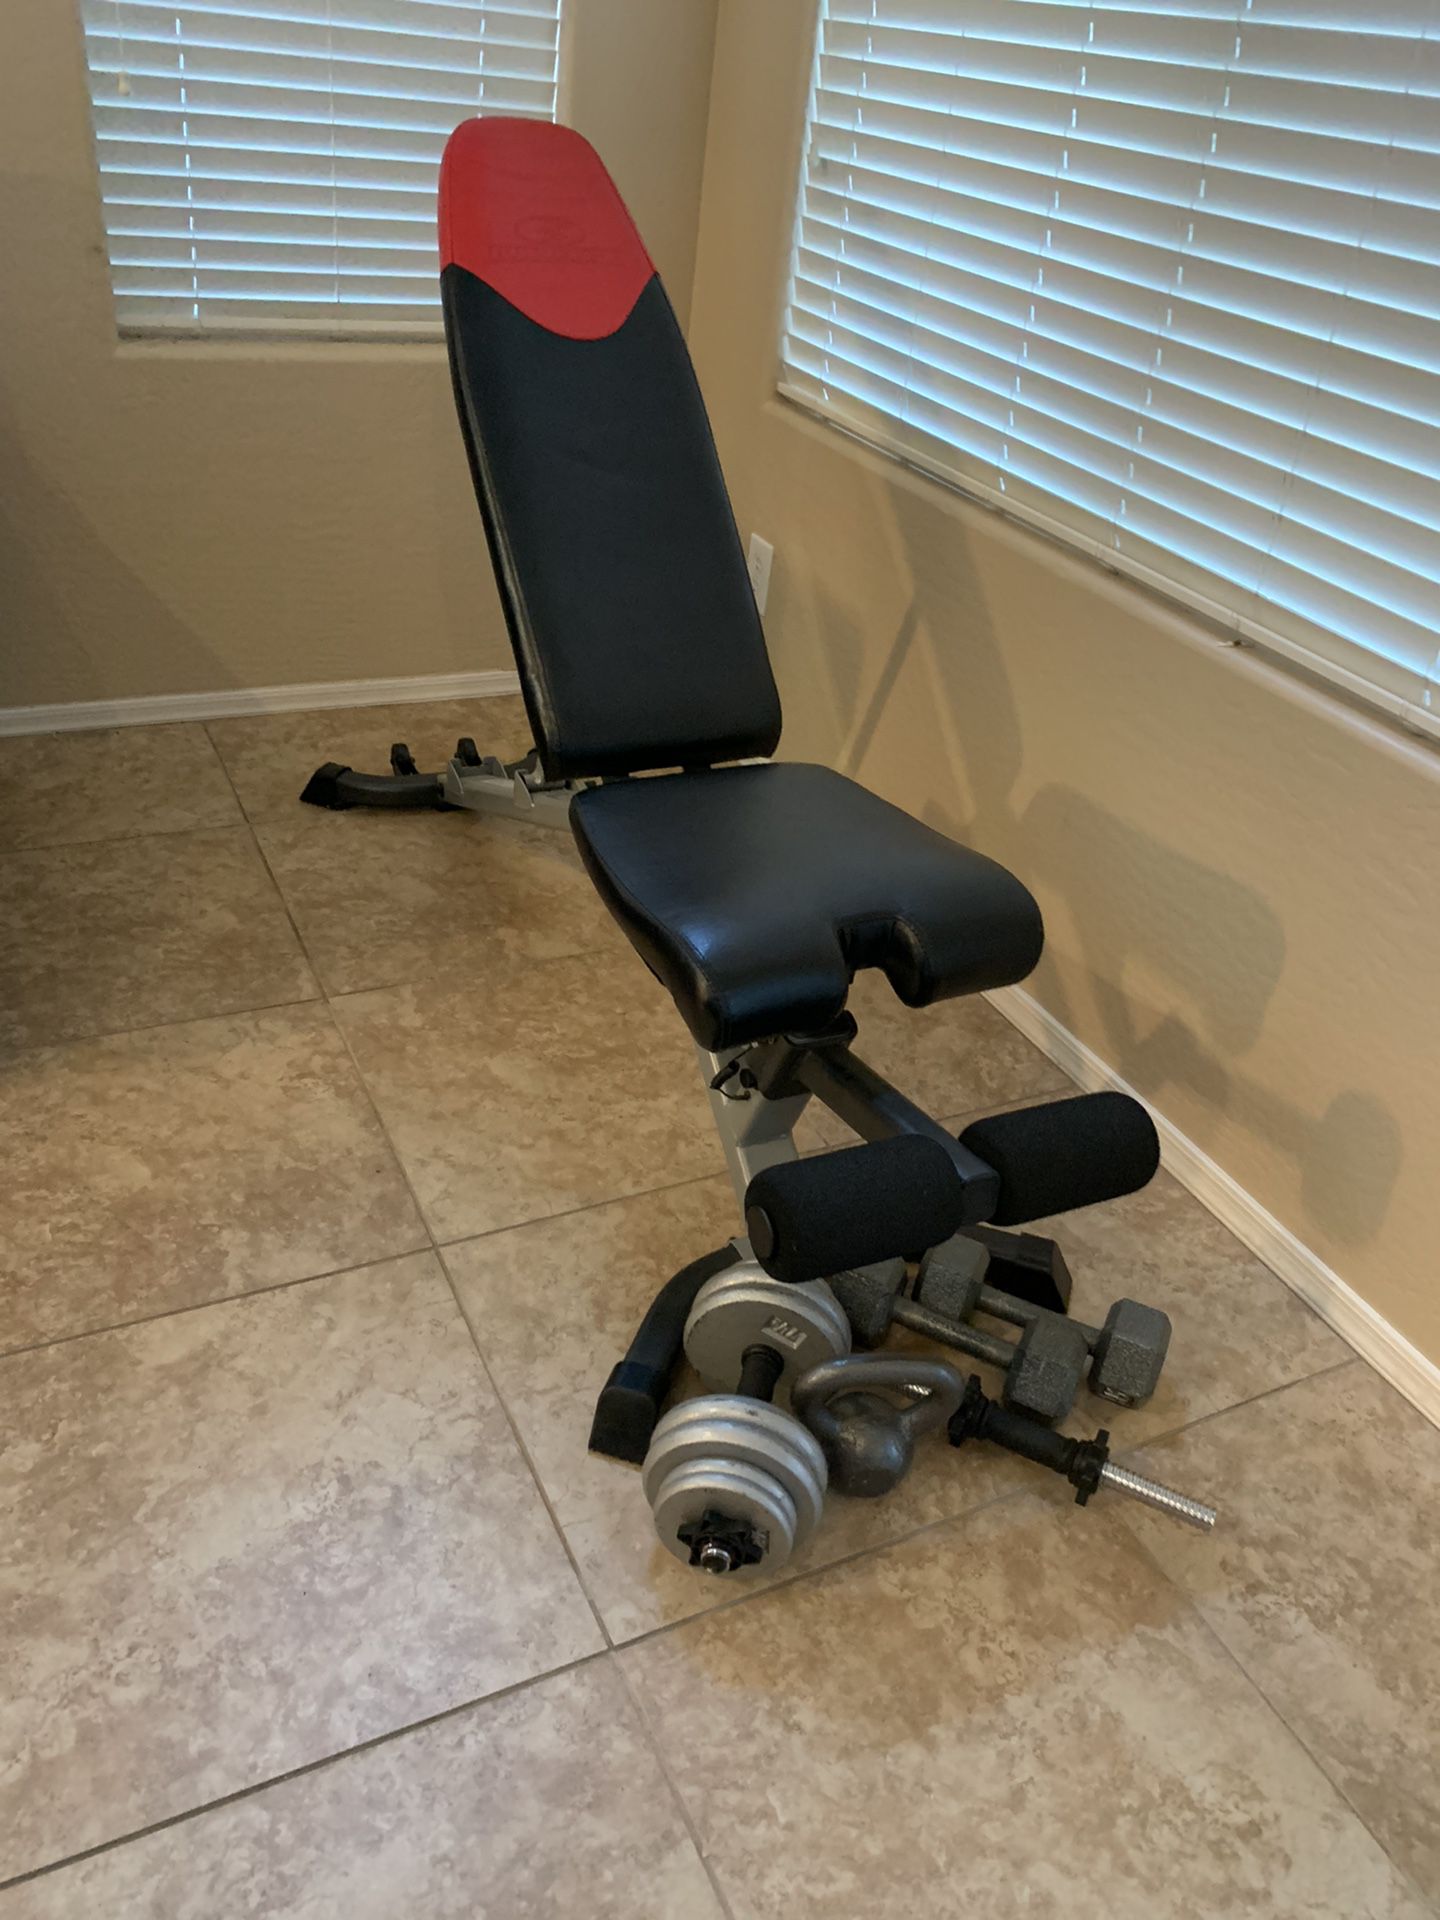 Workout bench and weights.